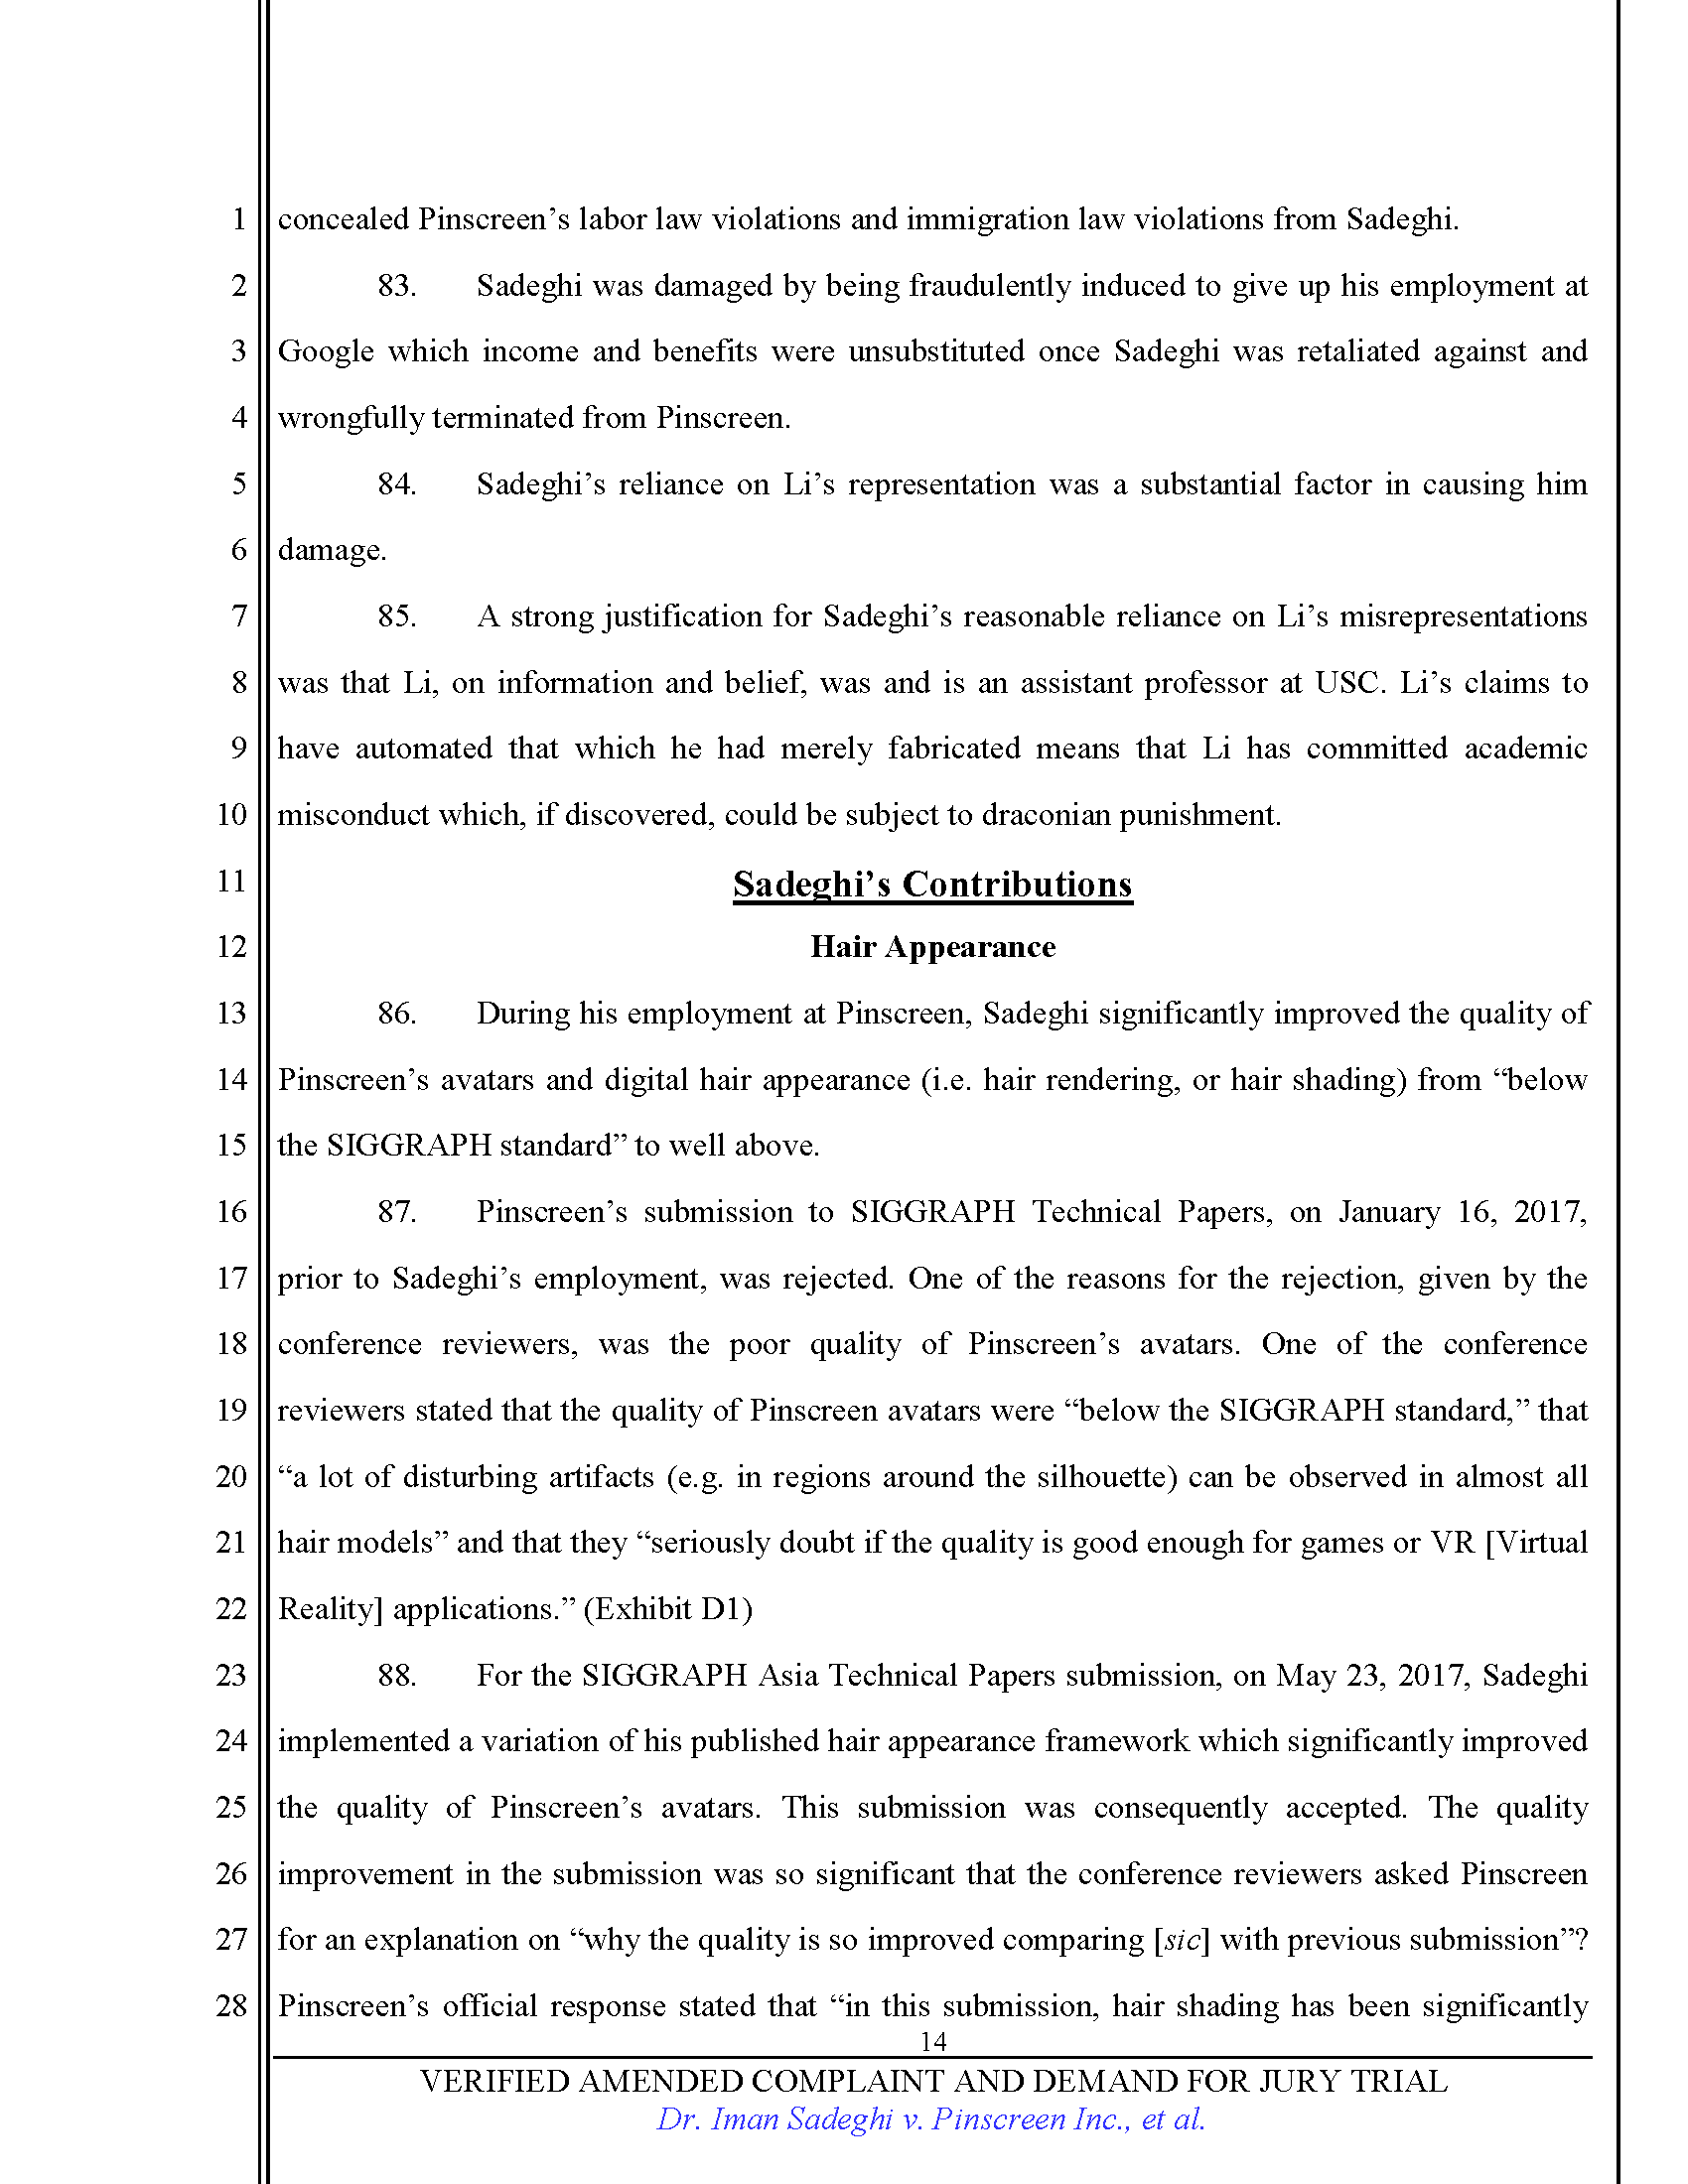 First Amended Complaint (FAC) Page 14